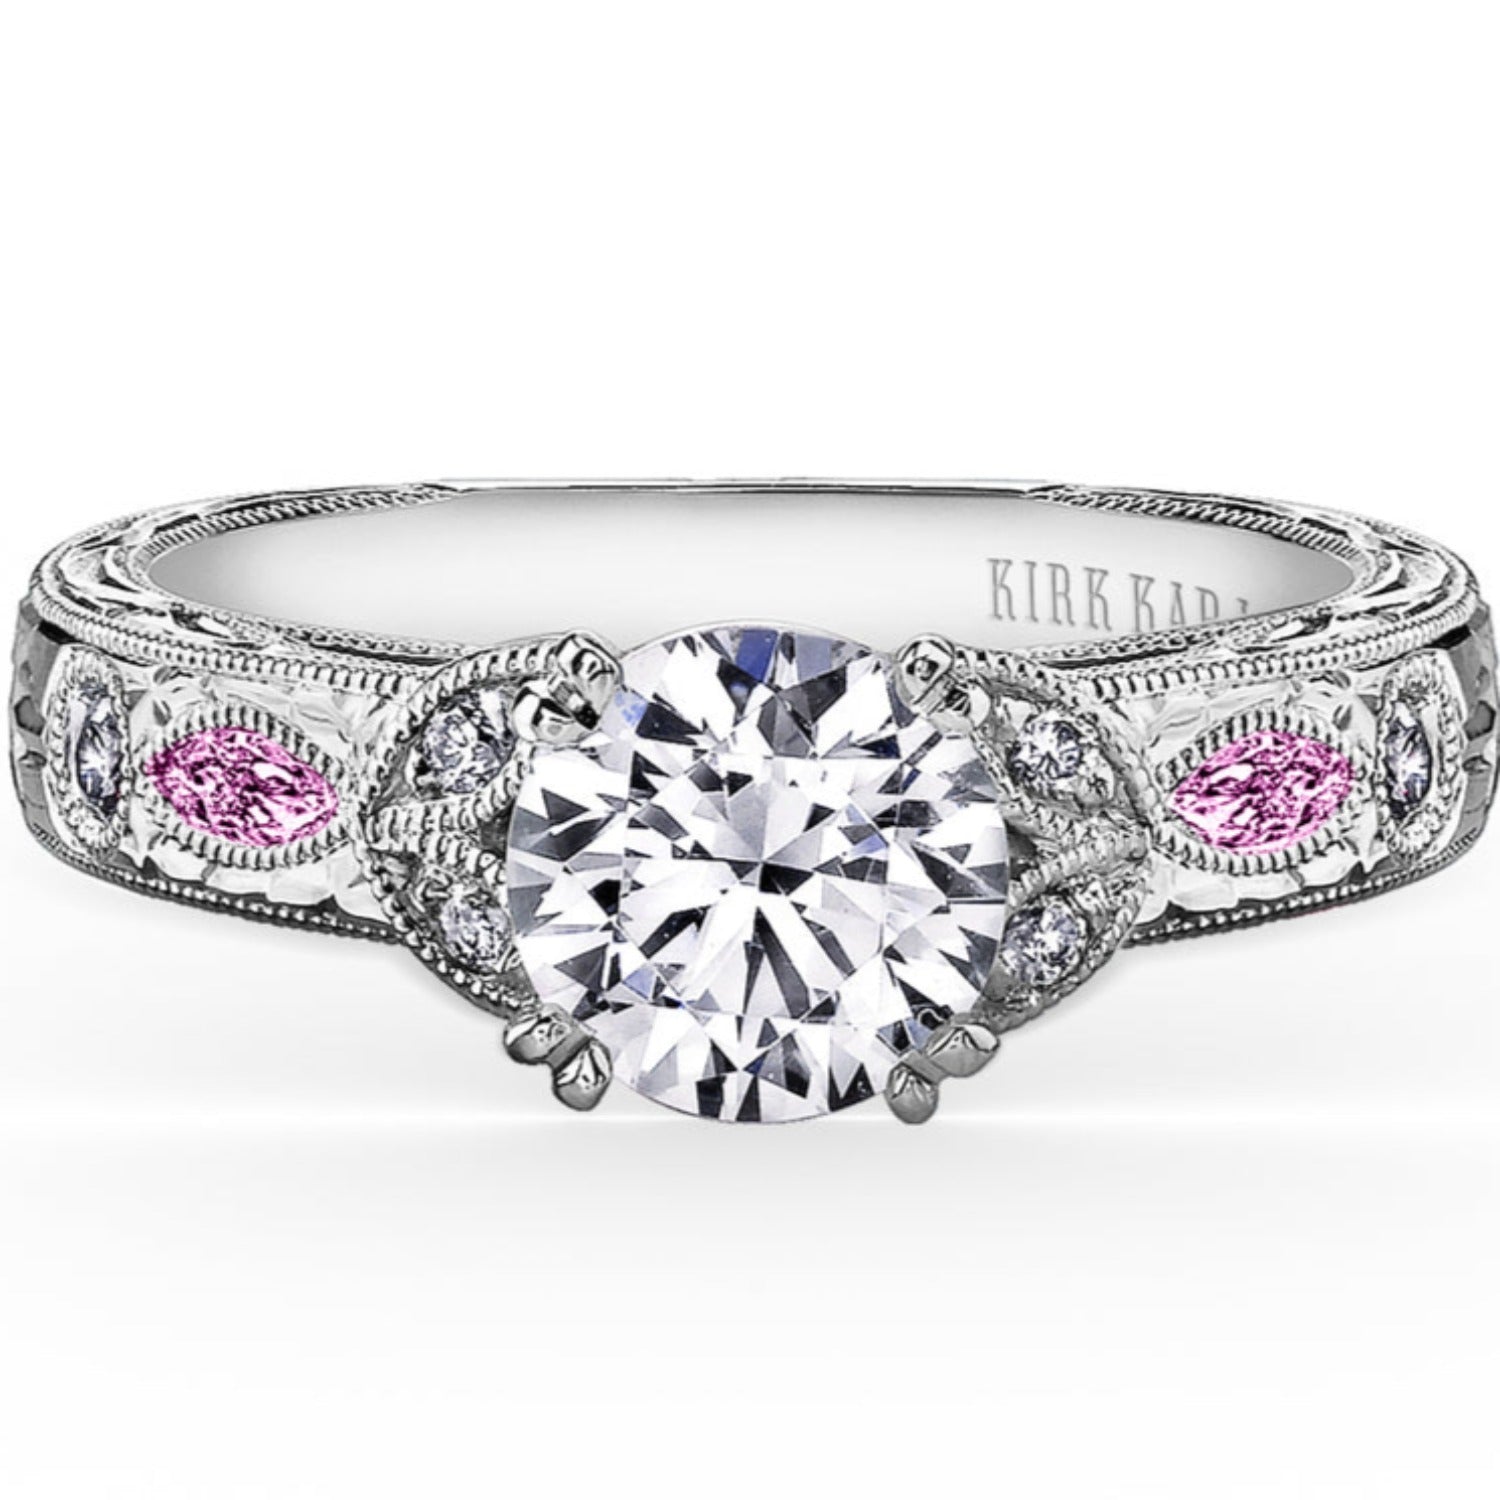 Should an Engagement Ring Be Too Big or Too Small? – Gems Of Royalty